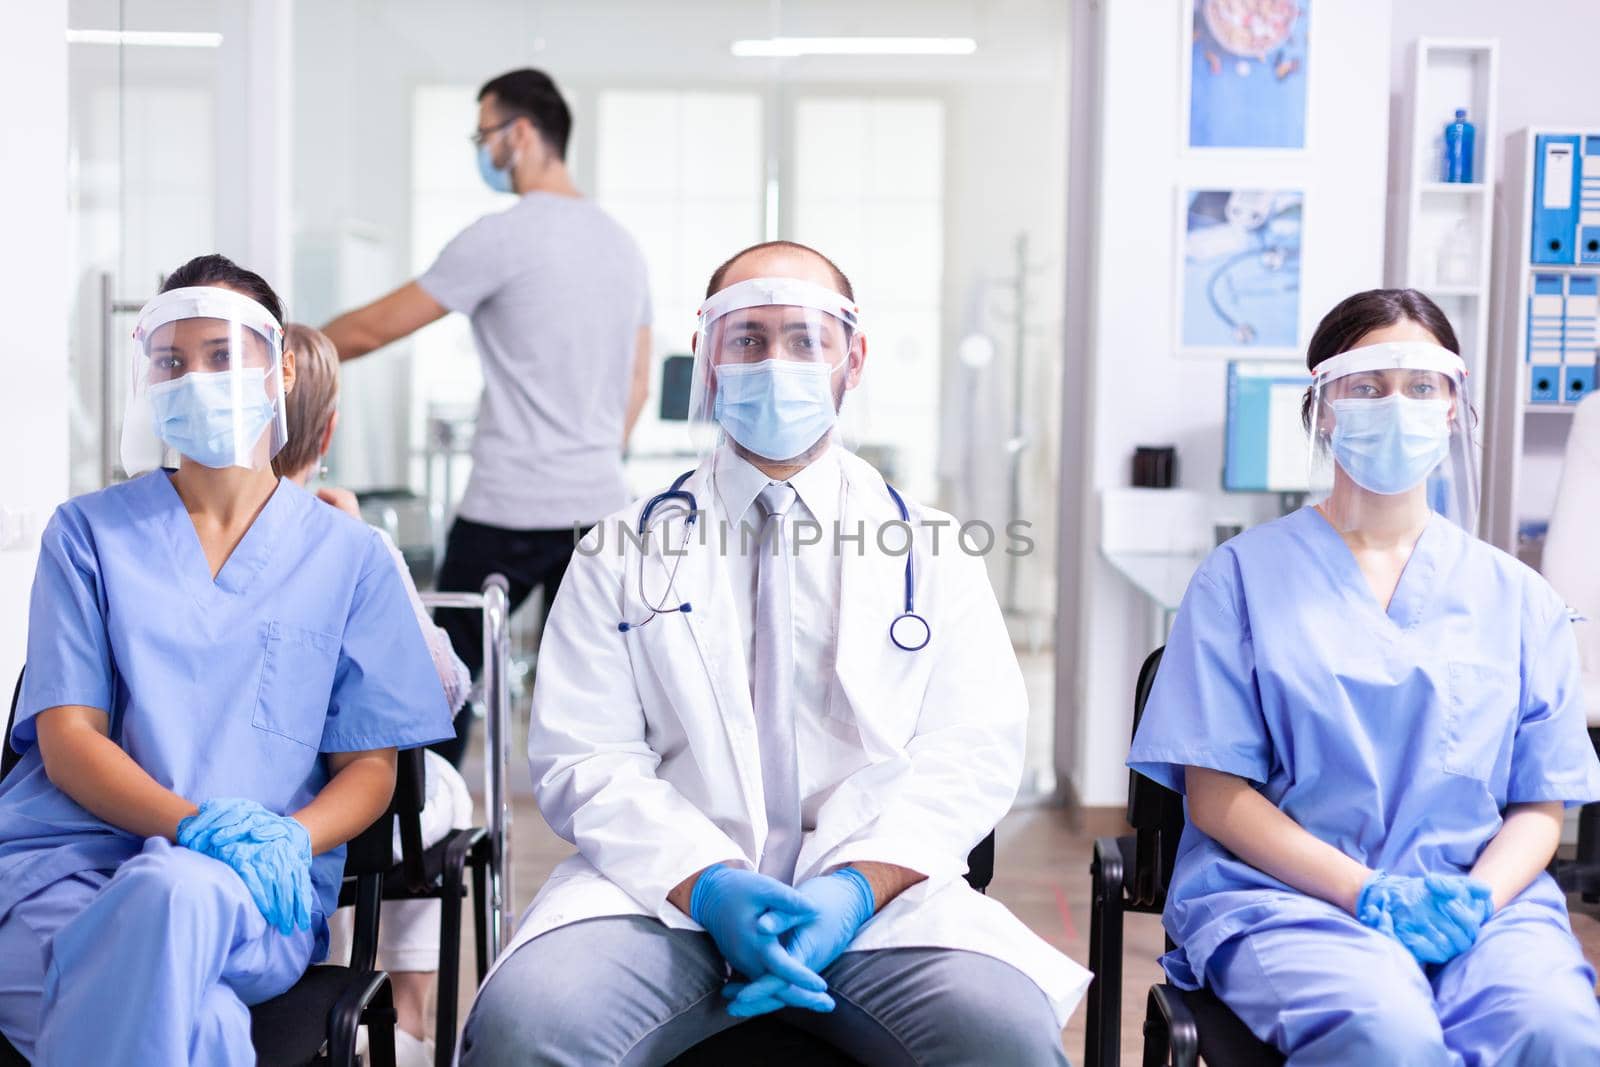 Group of medical personnel in hospital waiting area with visor and face mask against covid-19 to prevent infection. Wearing white coat and stethoscope.